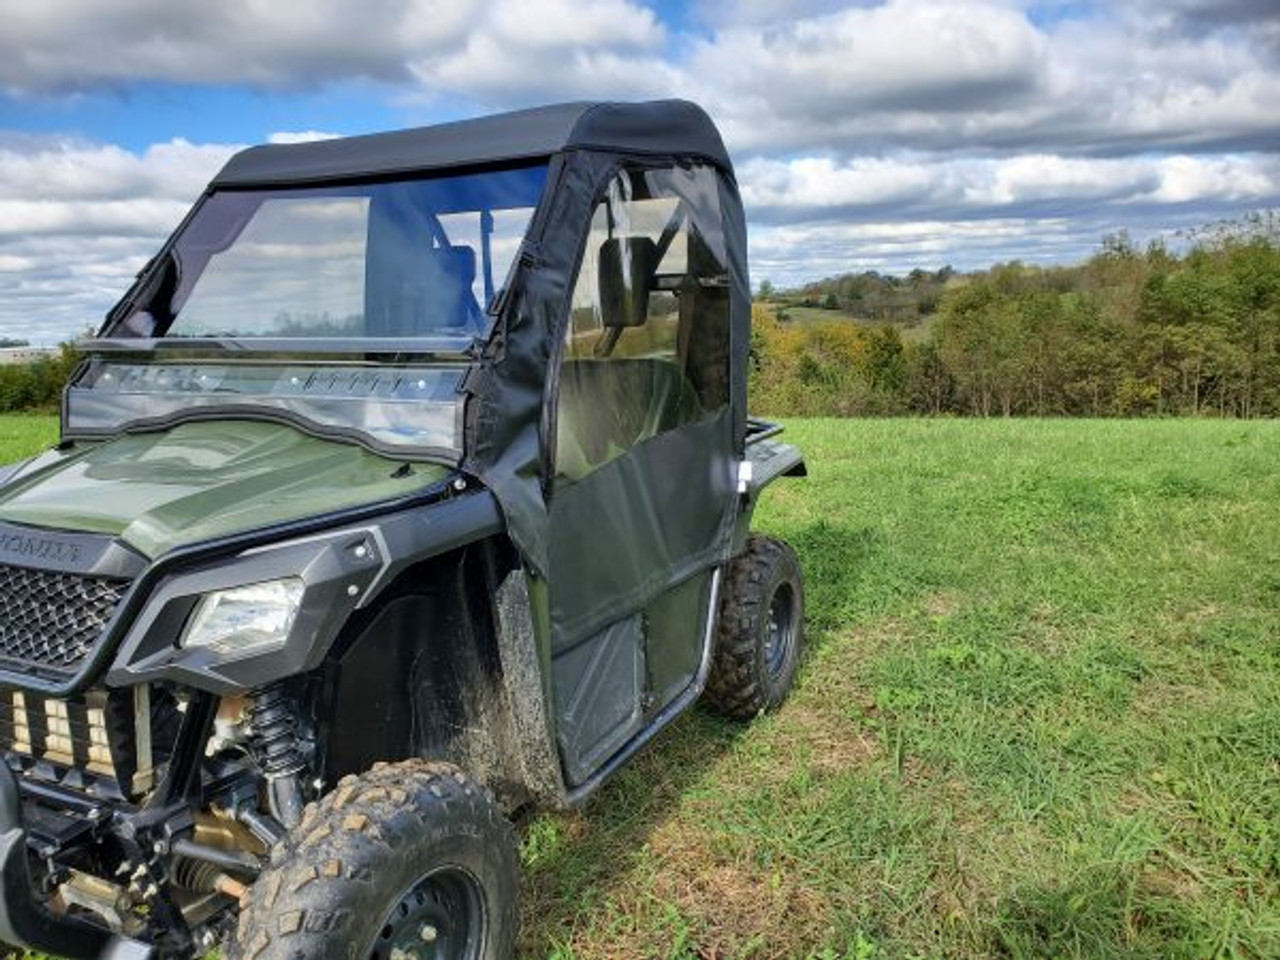 3 Star side x side Honda Pioneer 500/520 full cab enclosure front angle view